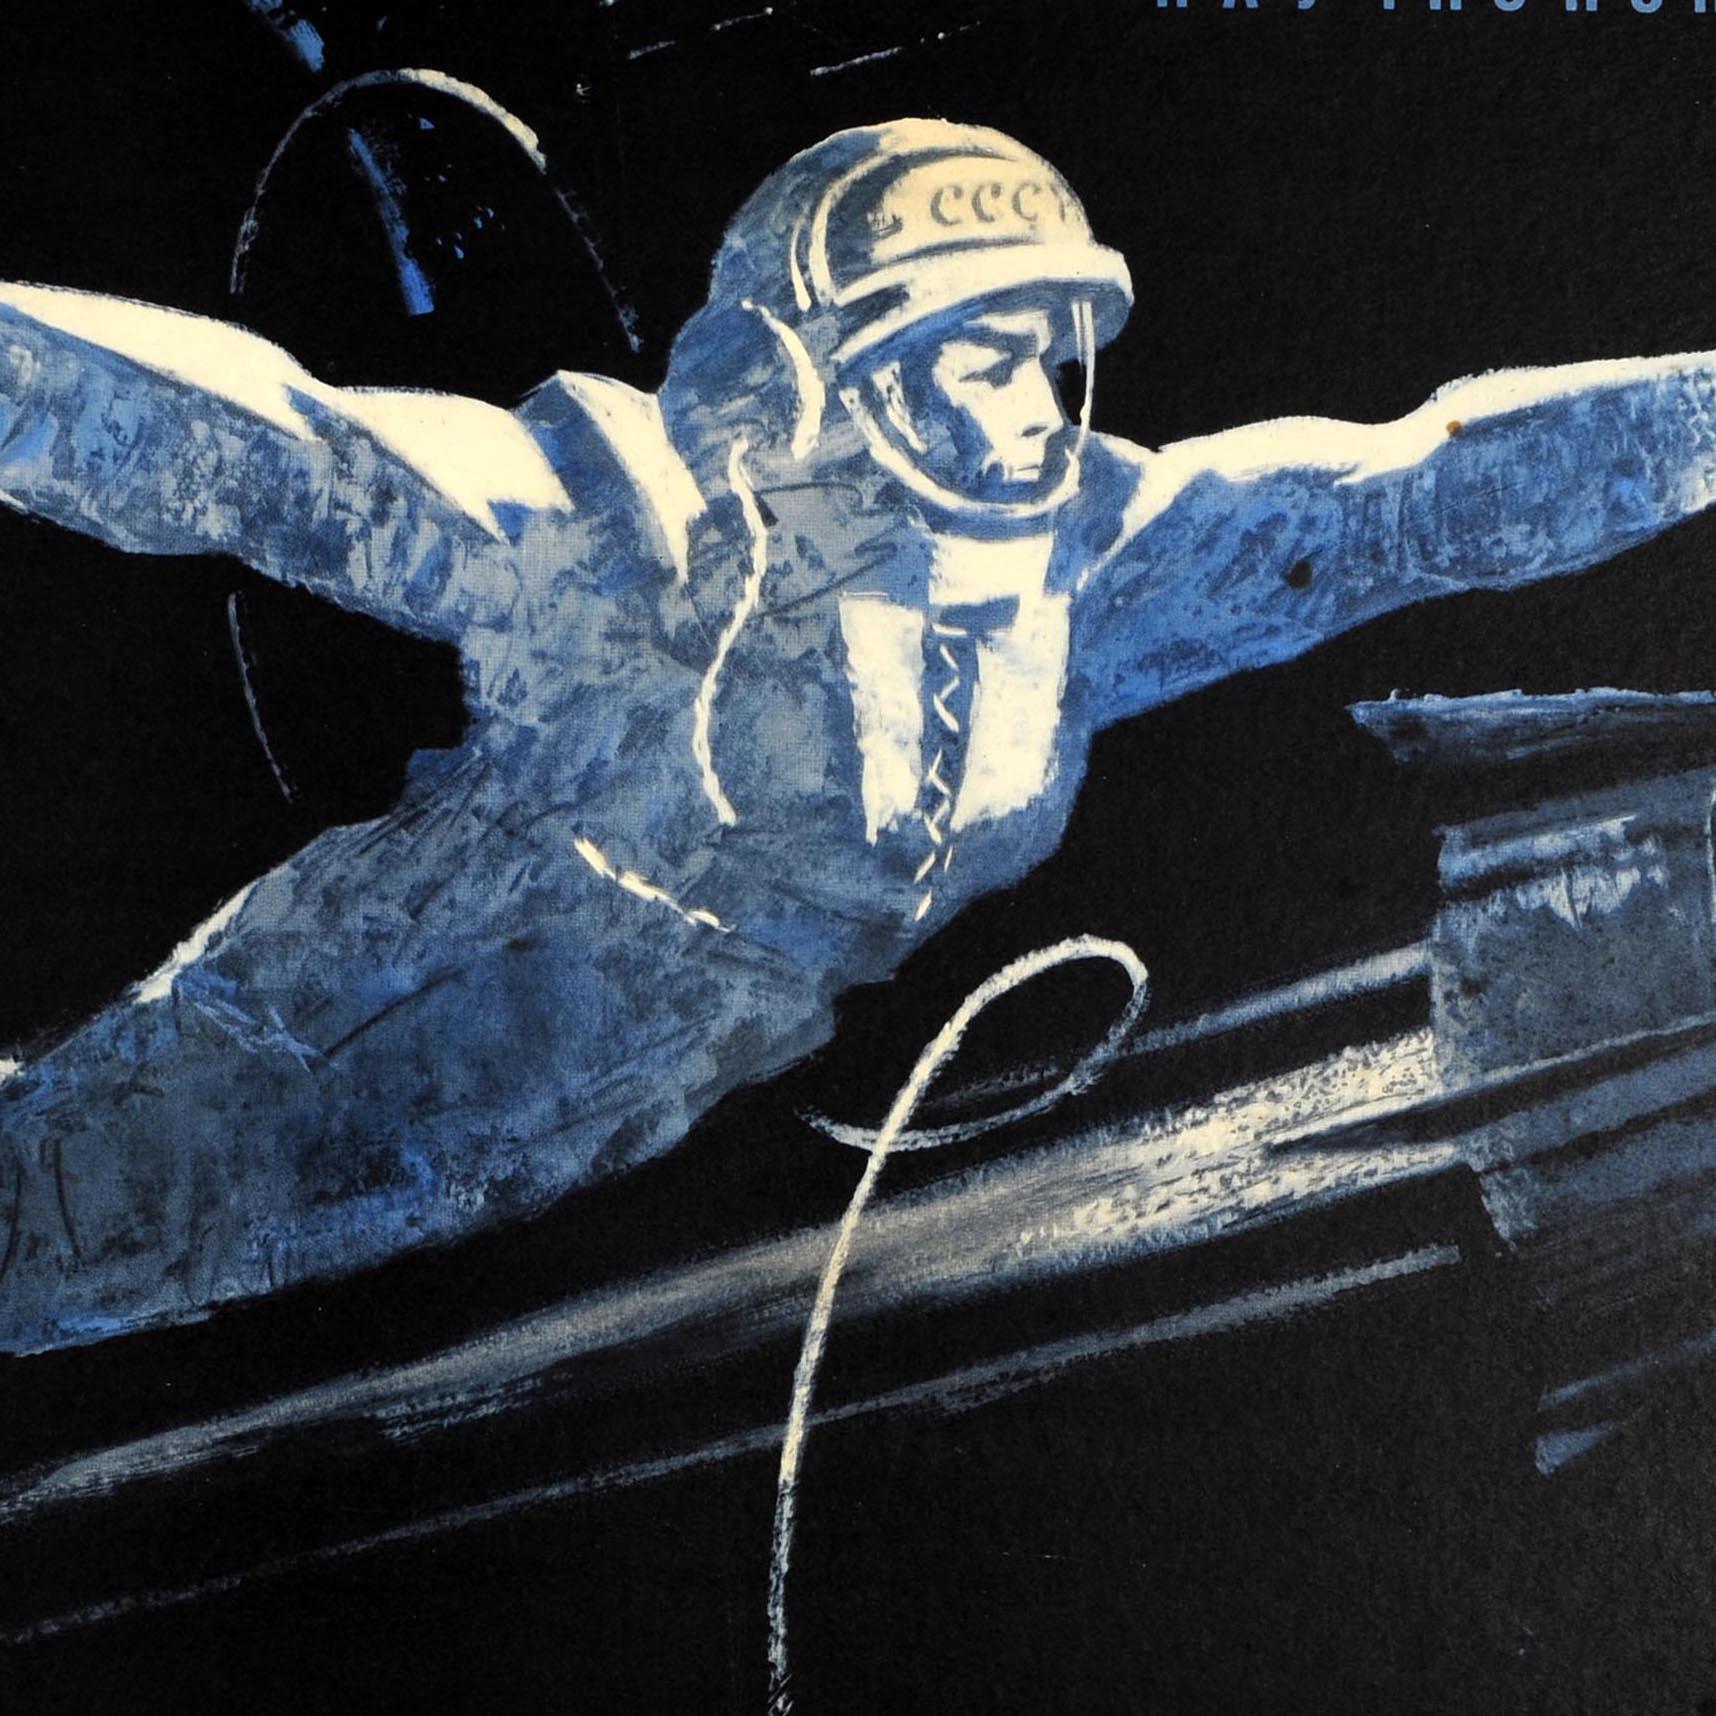 Original vintage Soviet movie poster for a documentary film - Человек вышел в космос / Man Enters Space - directed by G. Kosenko about the successful launch of Voskhod-2 into space and the first spacewalk on 18 March 1965 by the cosmonaut Alexey